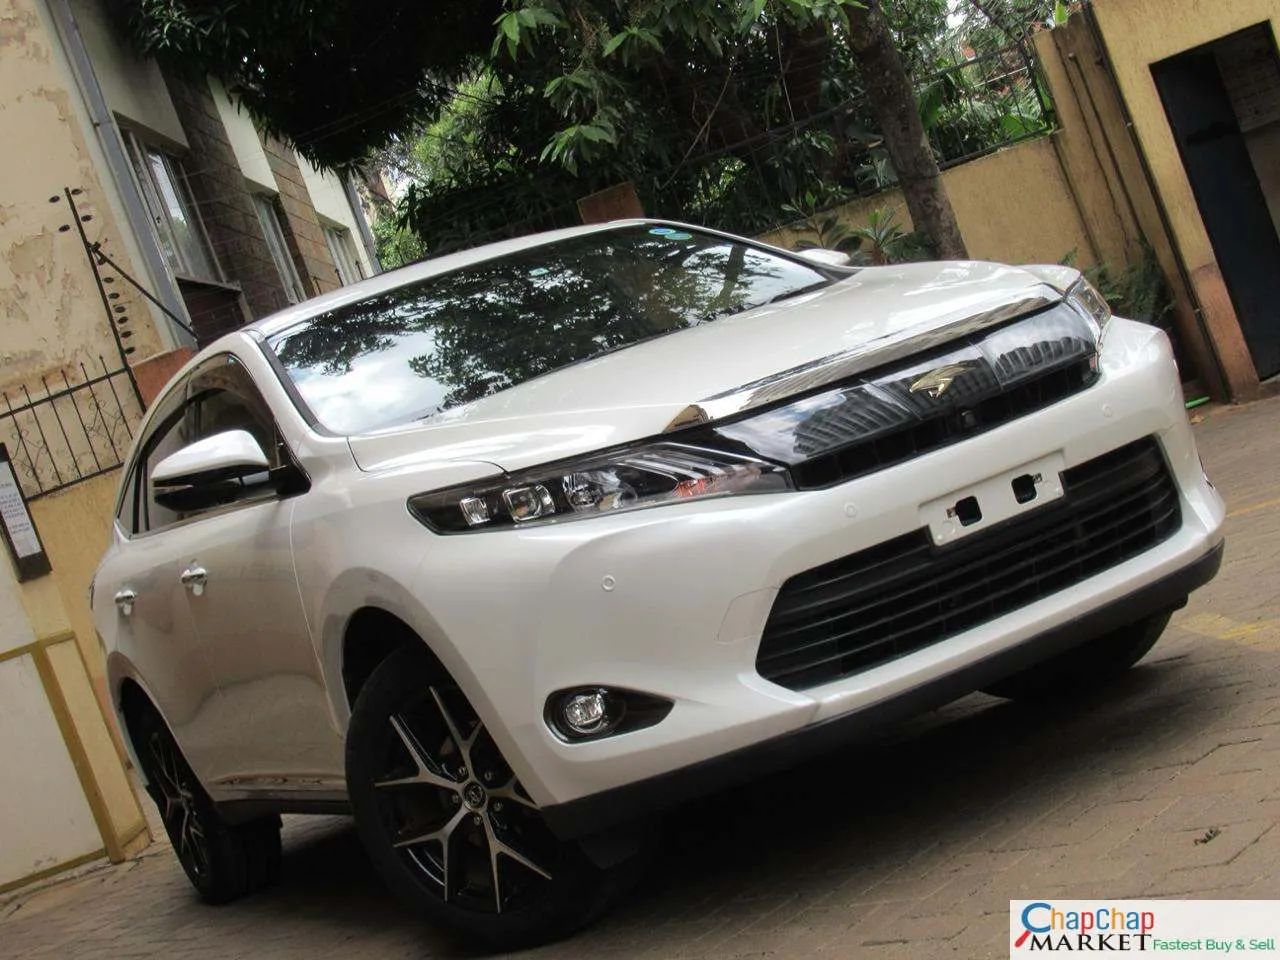 Toyota Harrier just arrived CHEAPEST You Pay 30% Deposit Trade in OK EXCLUSIVE Hire purchase installments